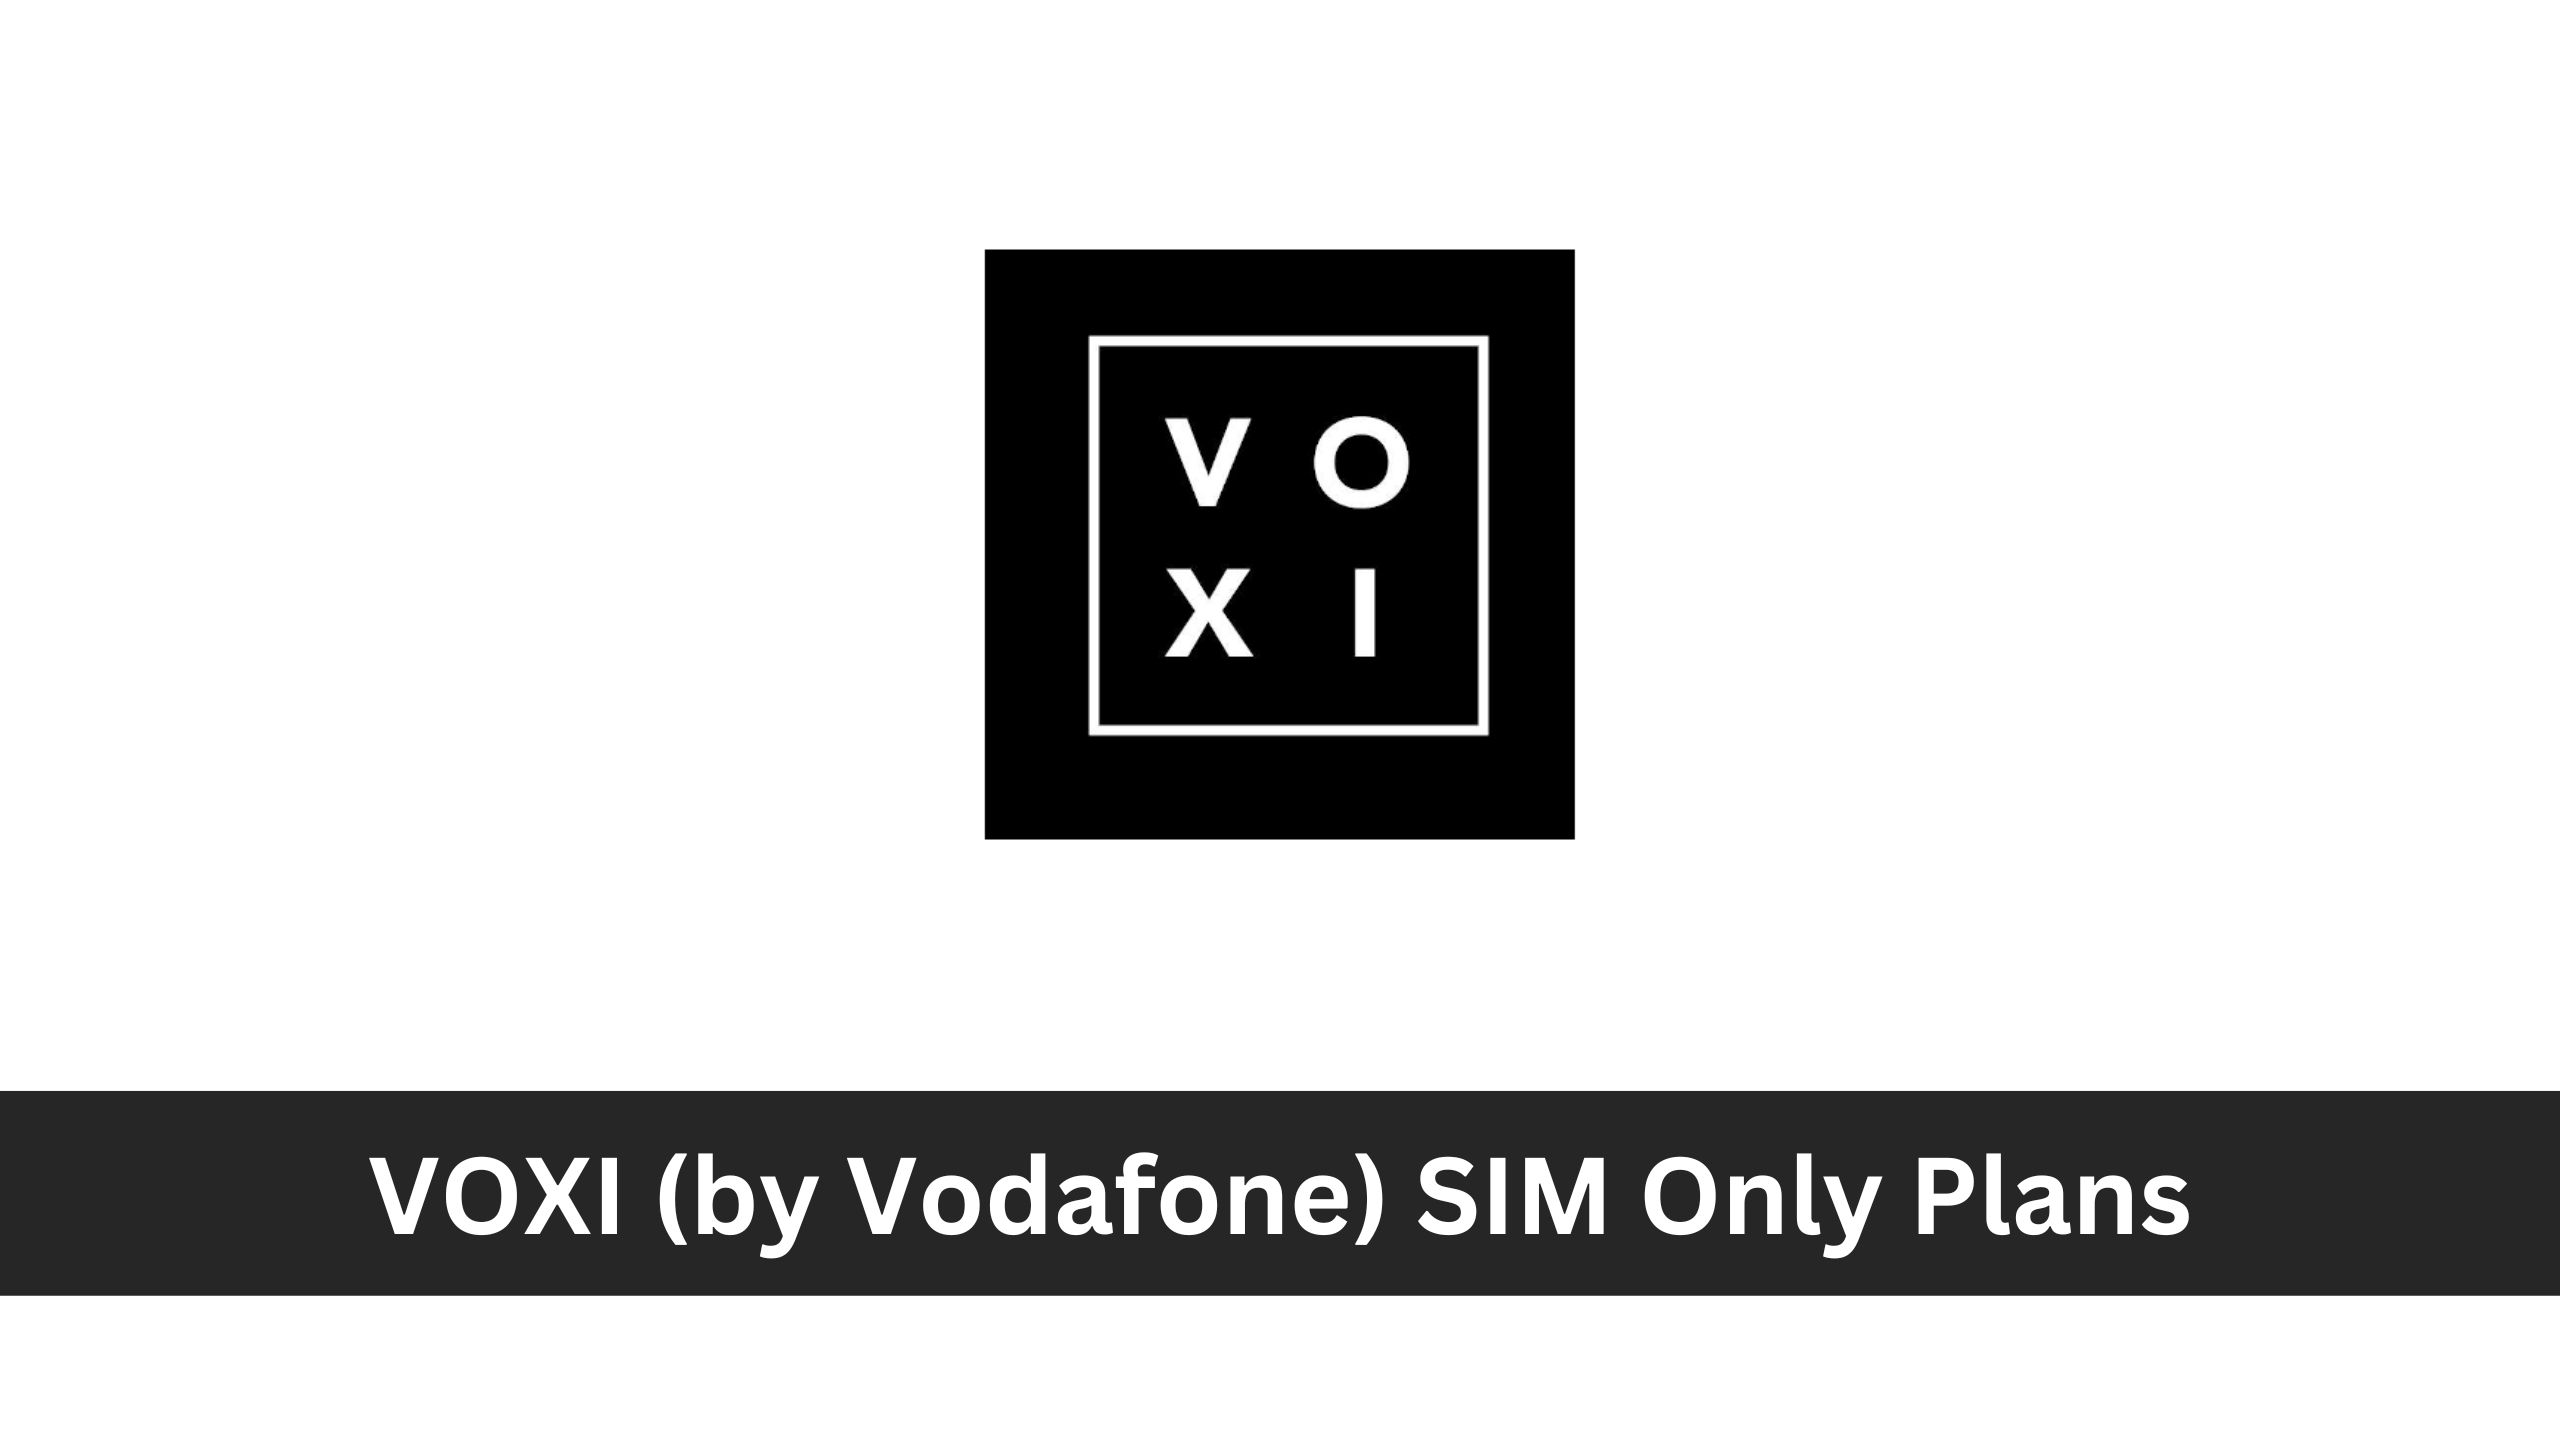 VOXI (by Vodafone) SIM Only Plans : Unlimited Internet